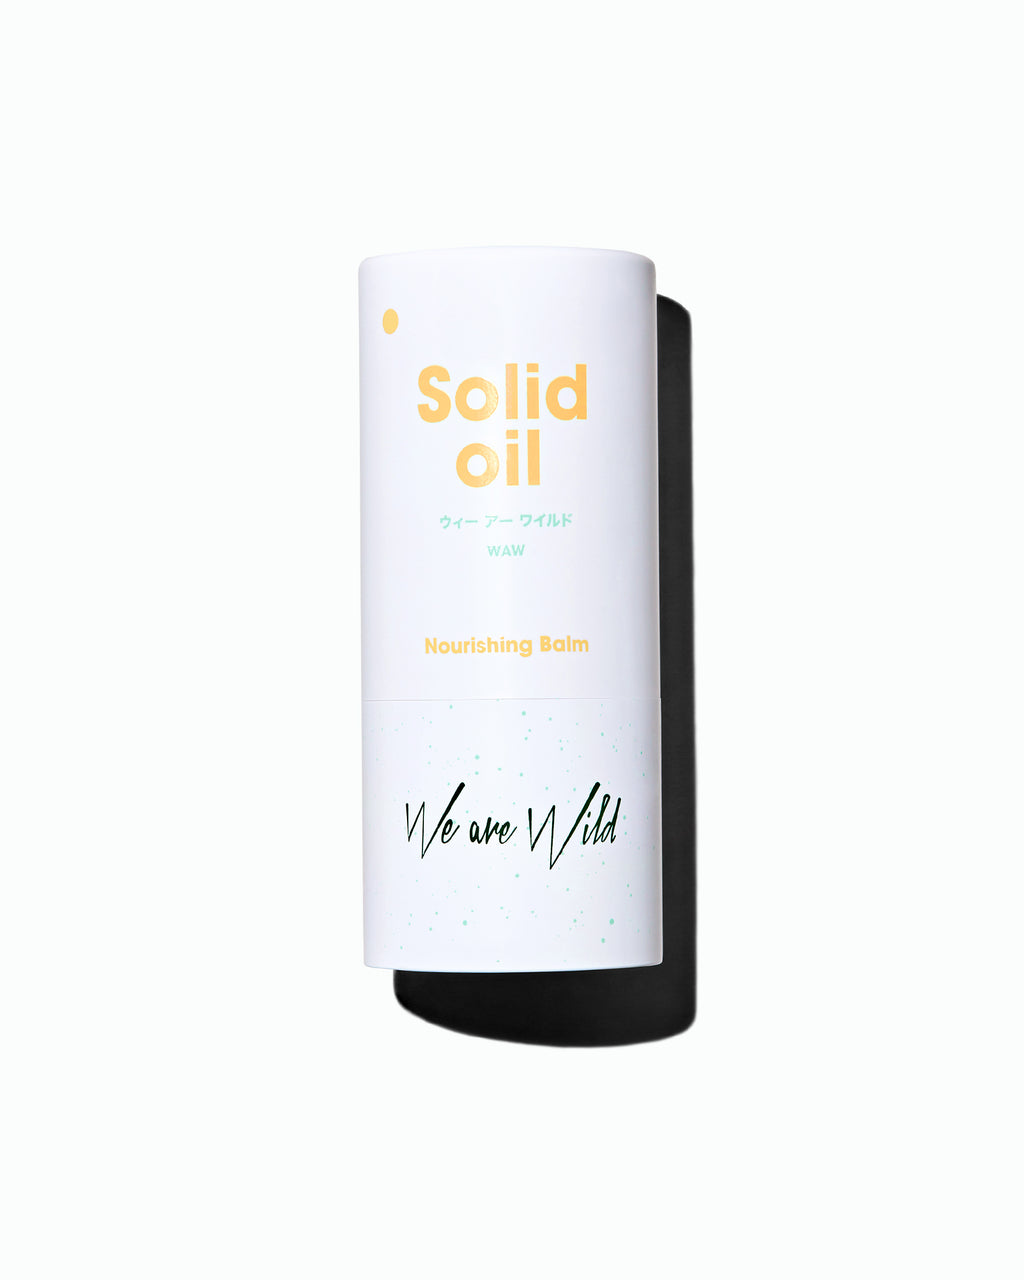 Solid oil - We are Wild